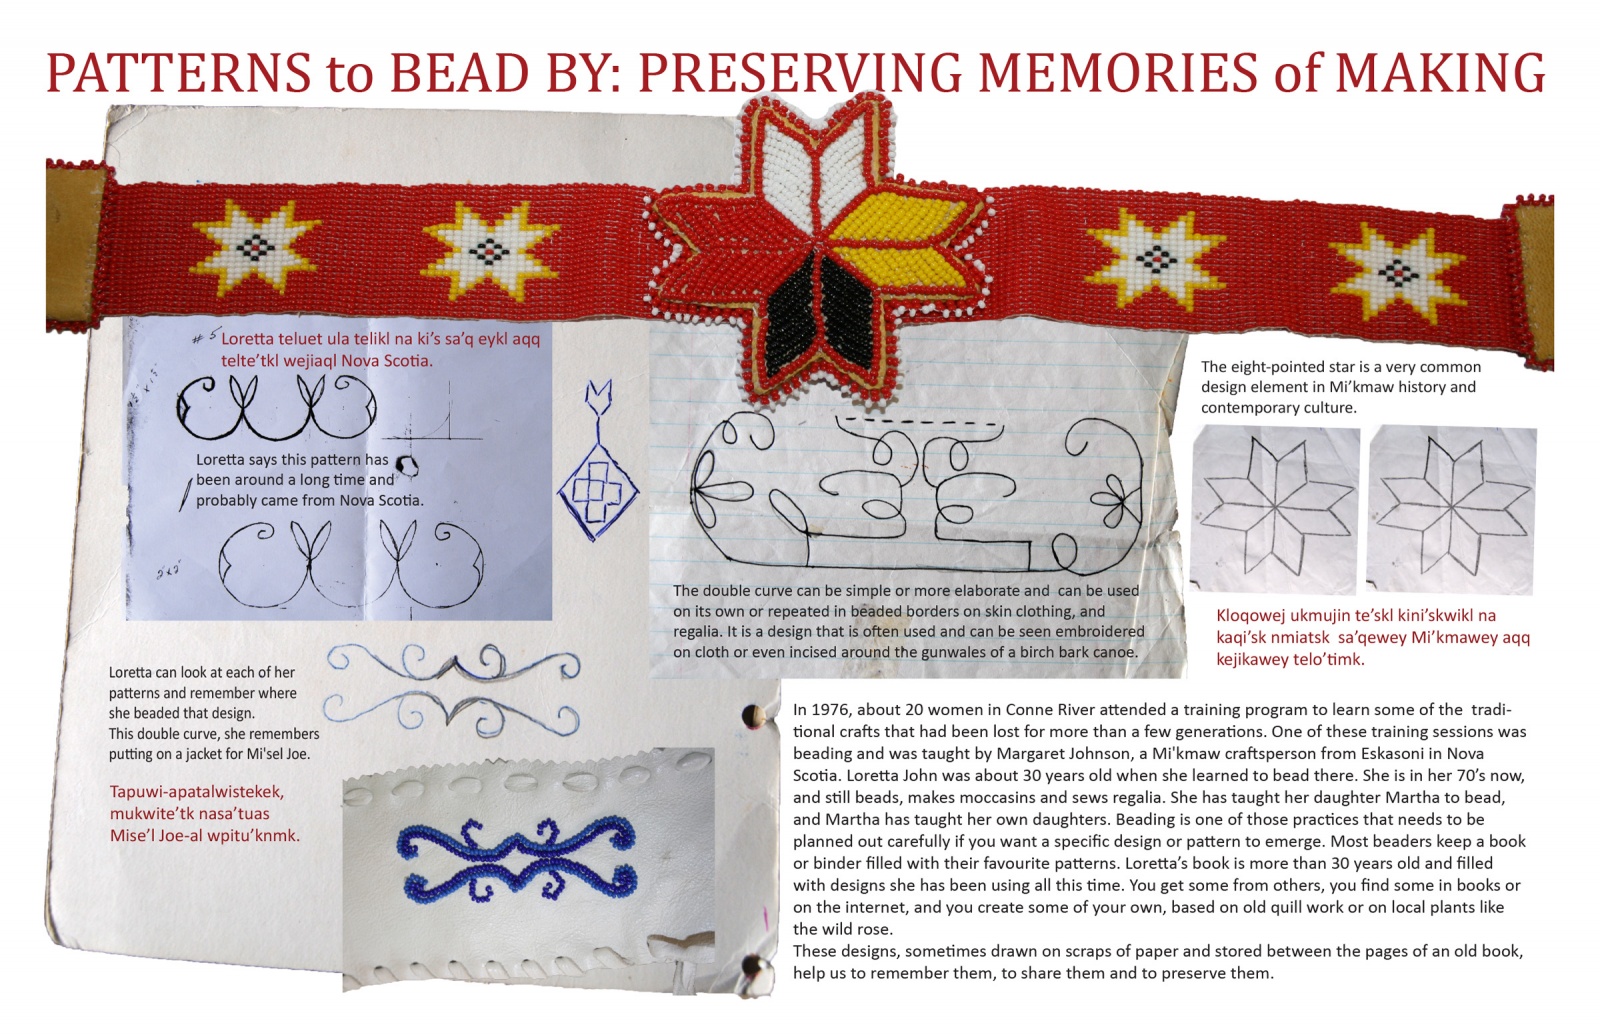 Patterns to Bead By: Preserving Memories of Making